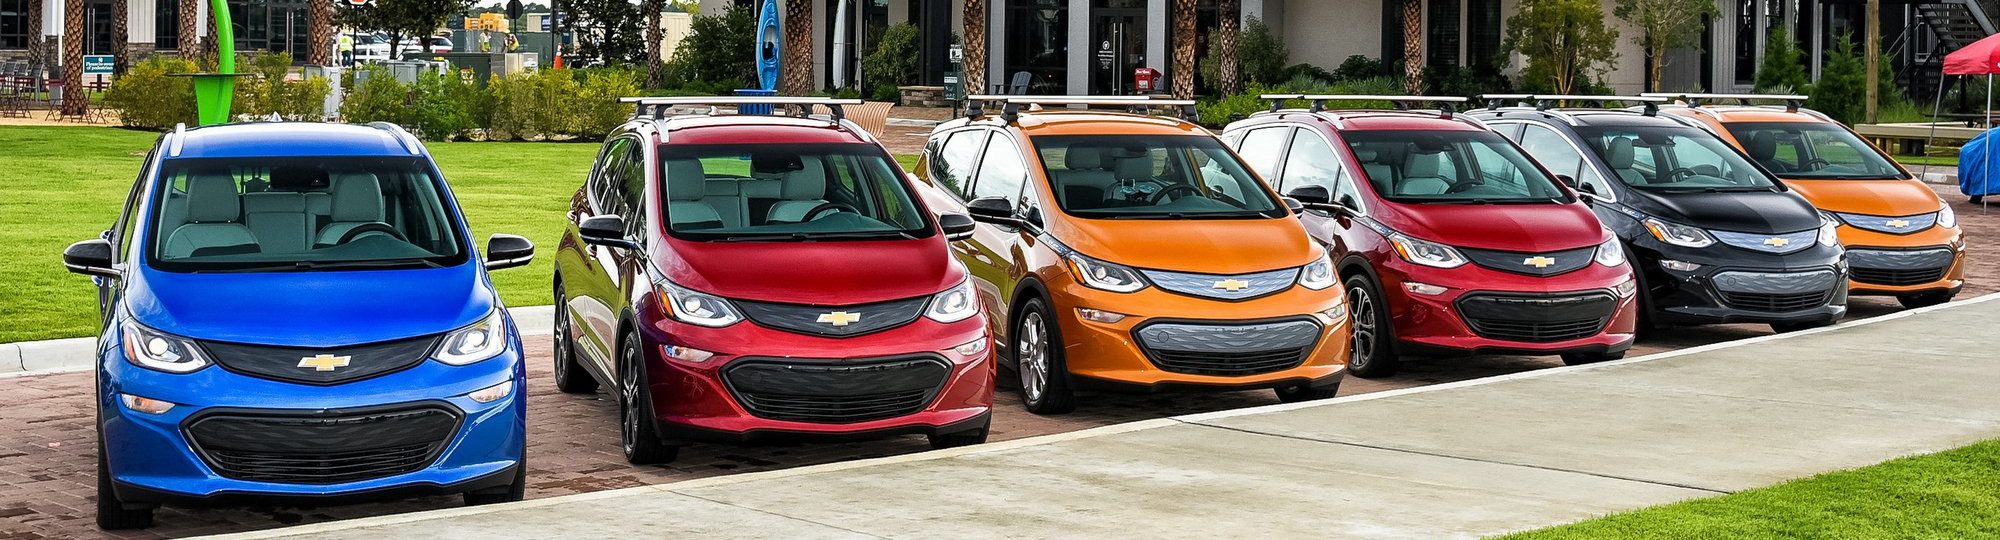 Chevrolet Bolts in a row